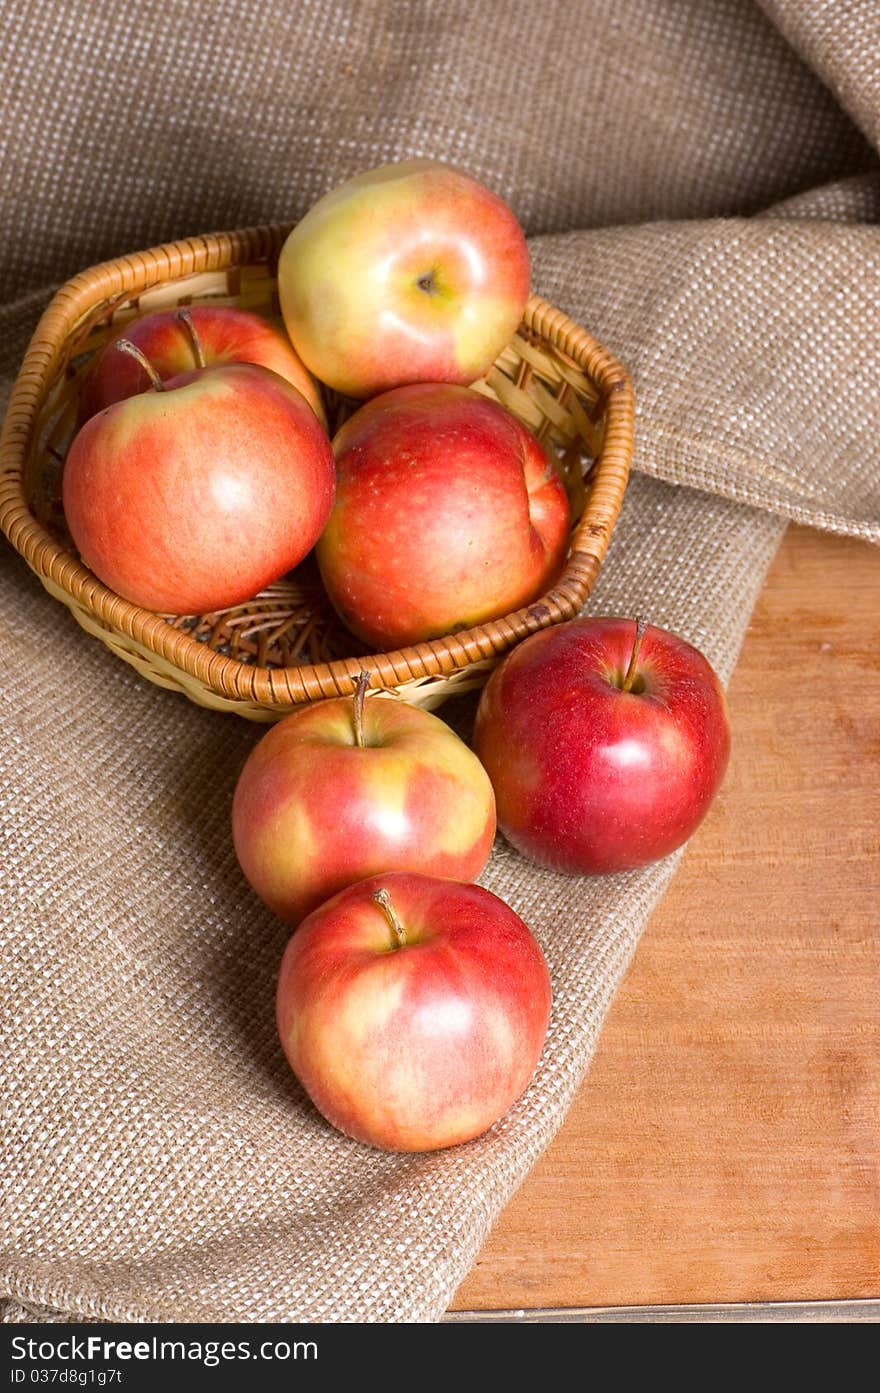 Apples on a sacking on a wooden table still life